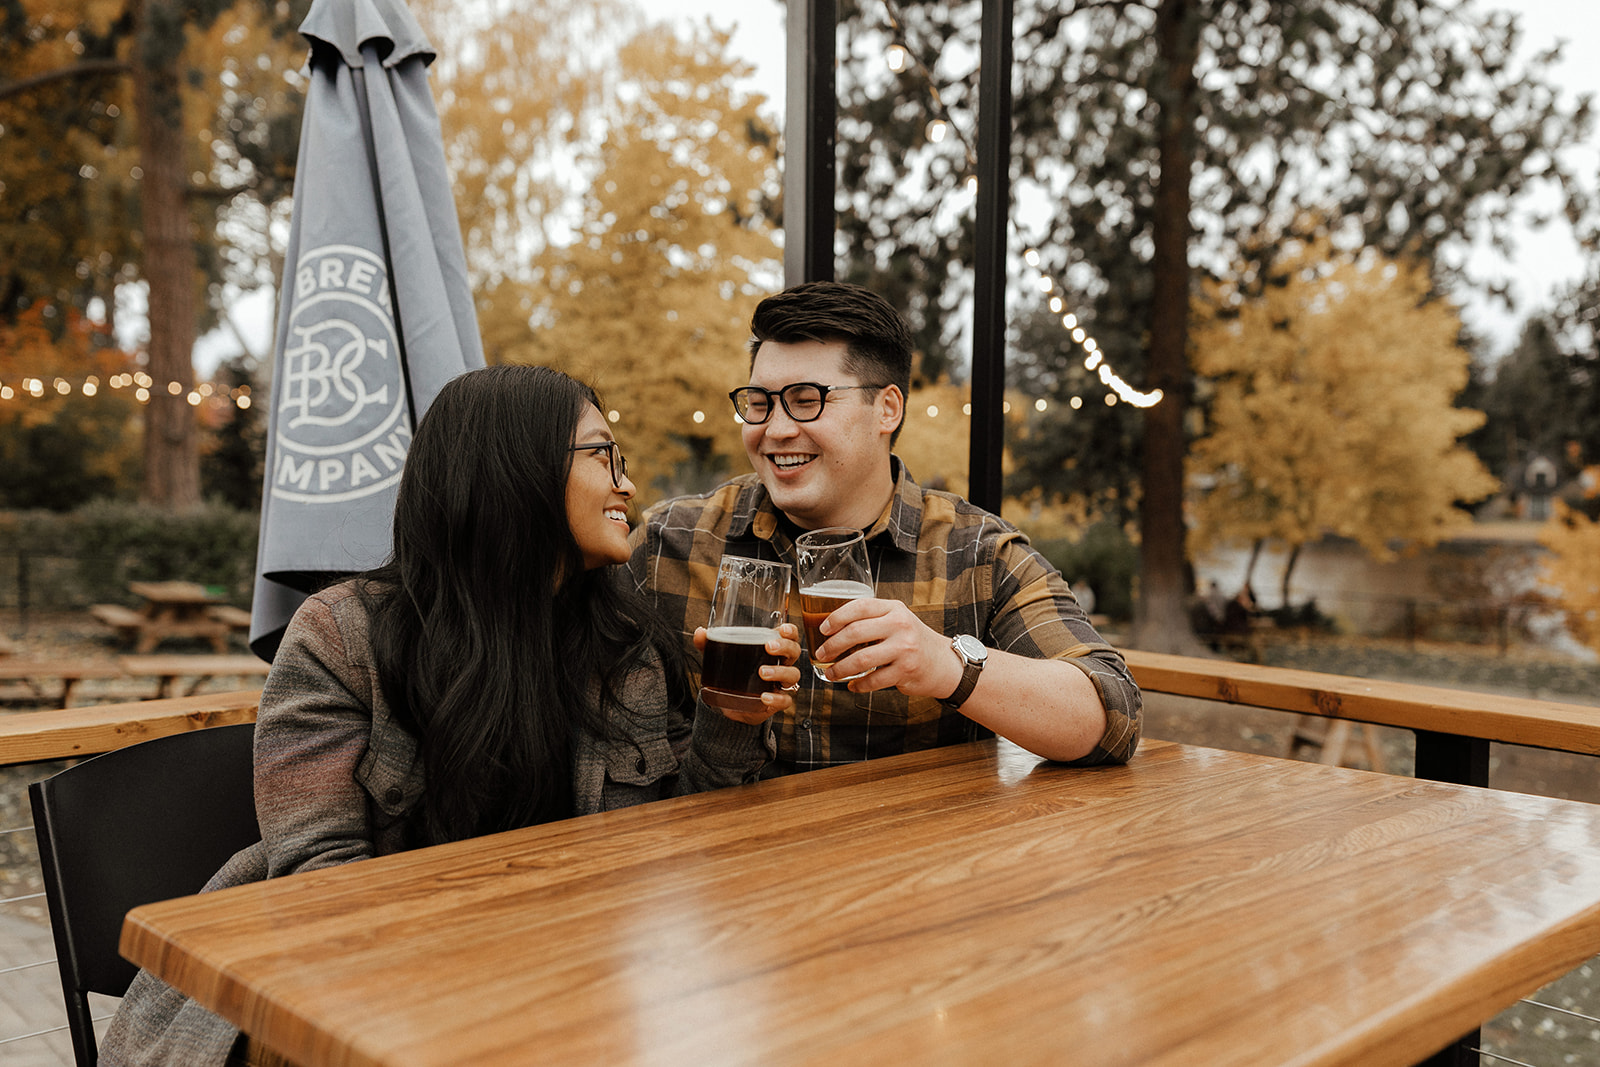 couple holding beer and cheers-ing at a table at Bend Brewing Co.